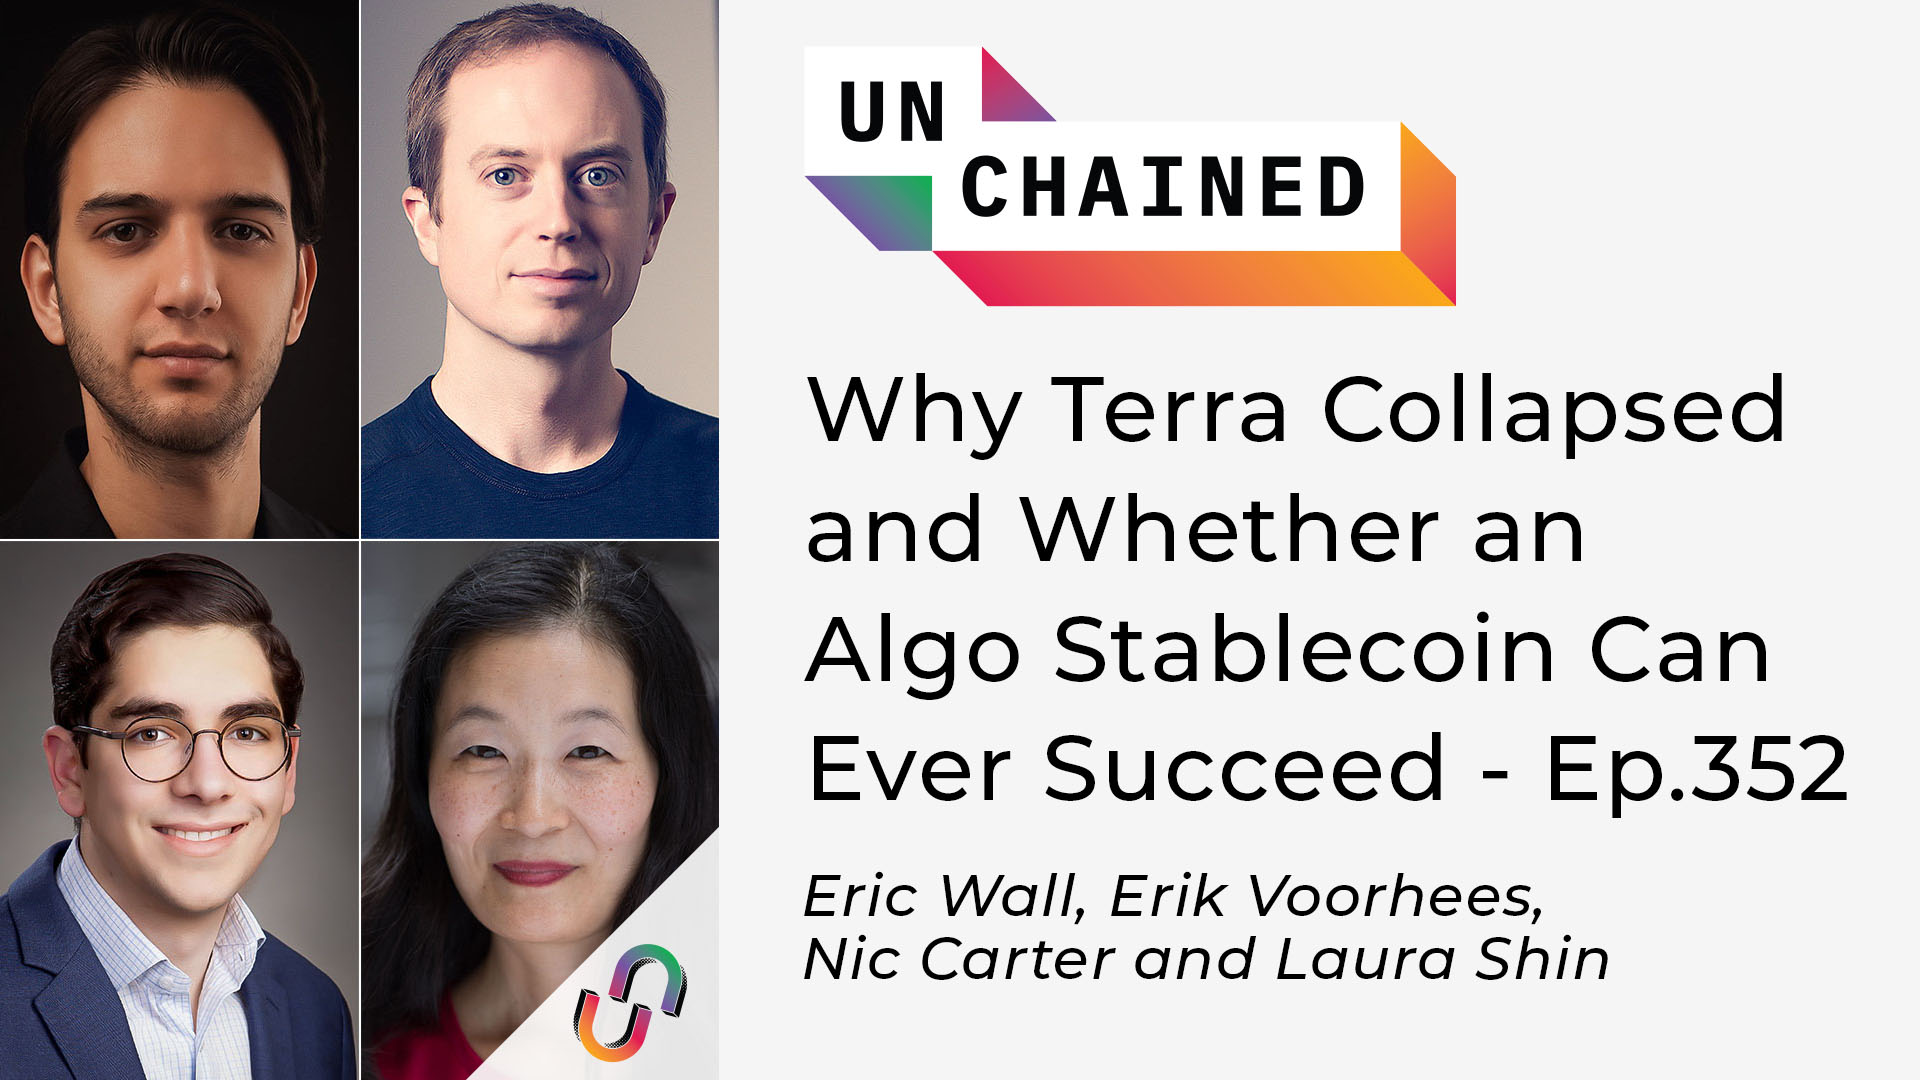 Unchained - Ep.352 - Why Terra Collapsed and Whether an Algo Stablecoin Can Ever Succeed